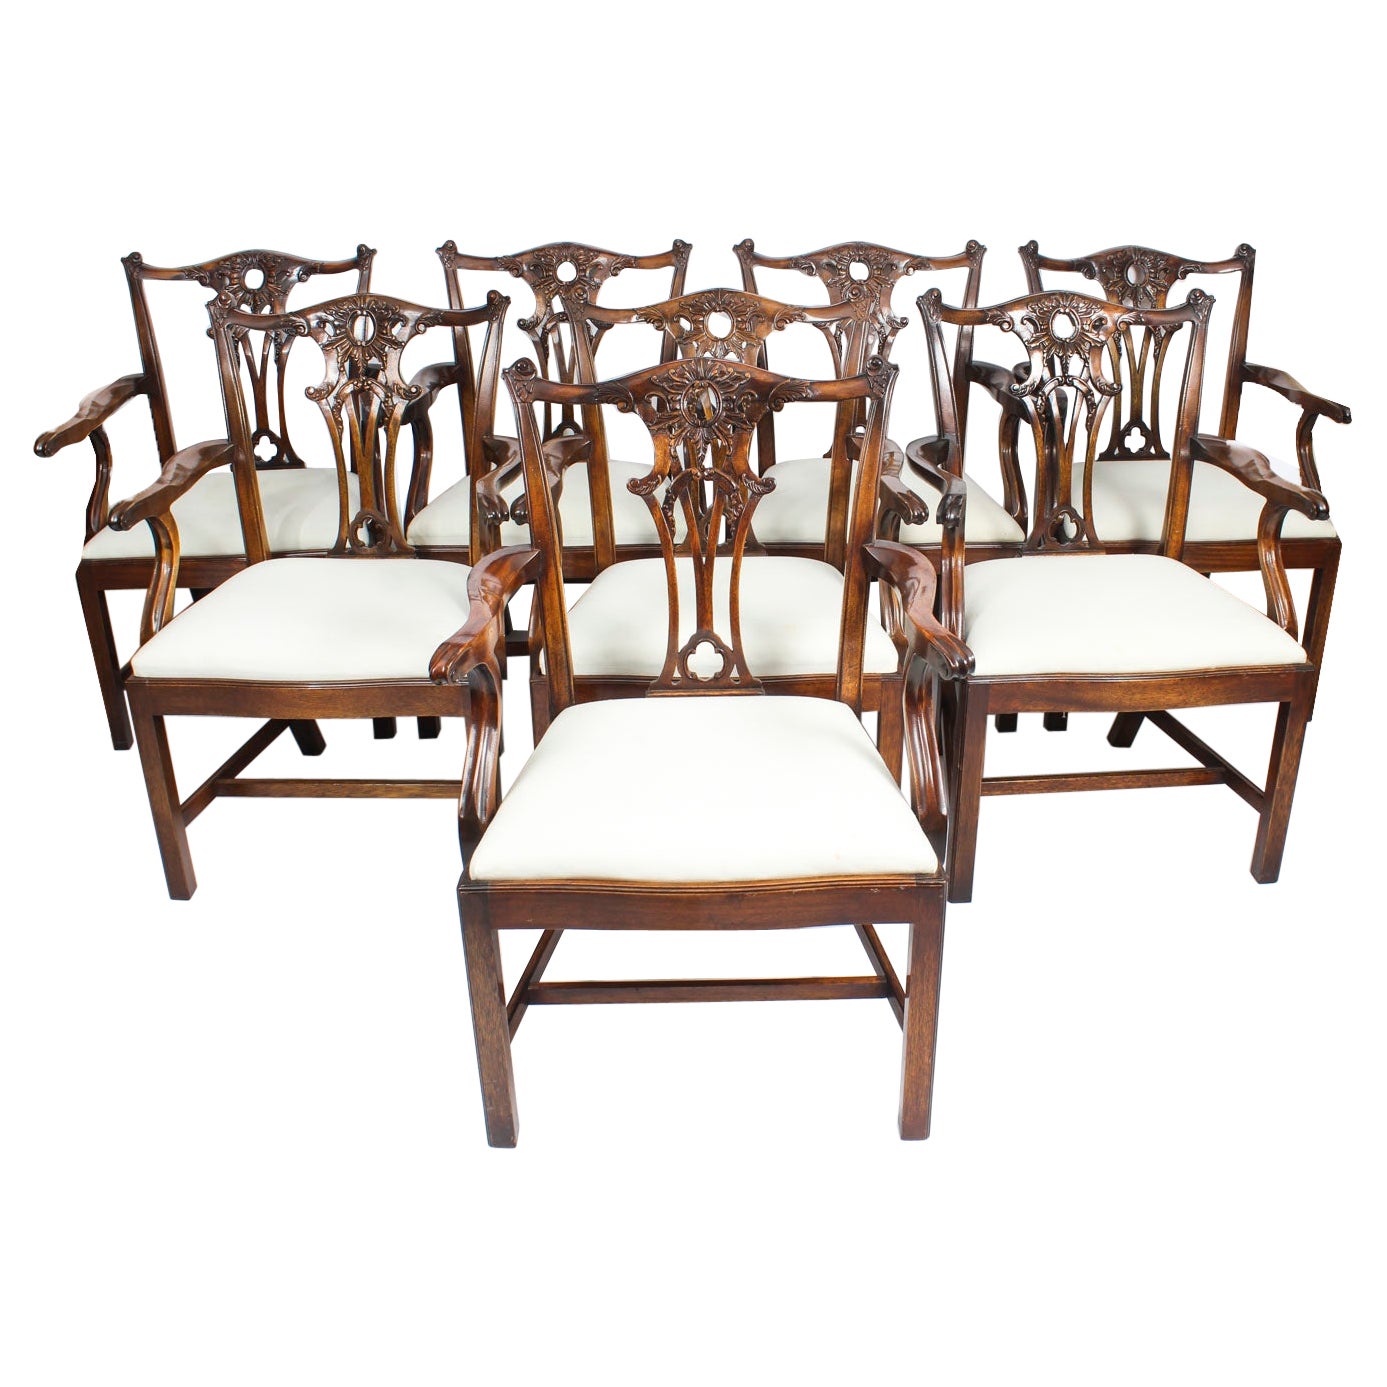 Vintage Set of 8 Chippendale Revival Arm Chairs 20th Century For Sale